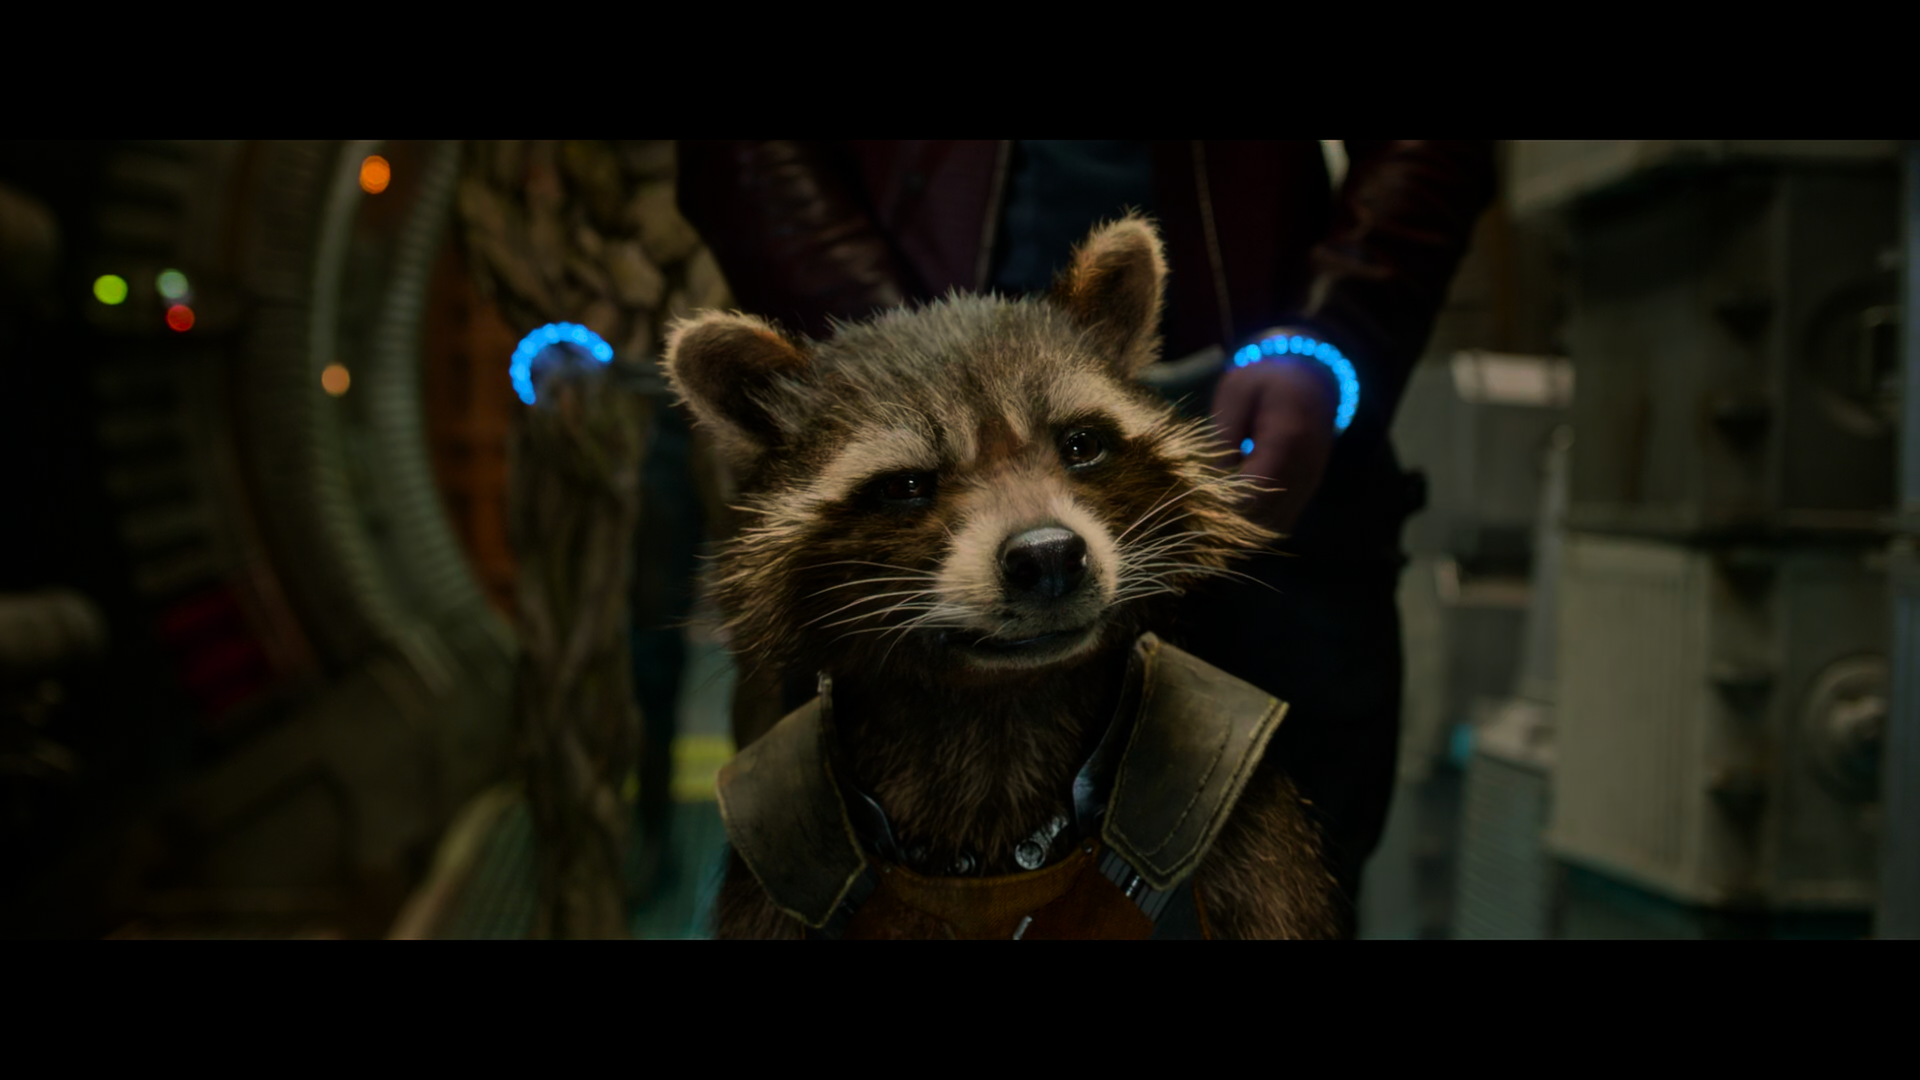 Guardians of the Galaxy 2014 2160p HDR bluray WMAN LorD